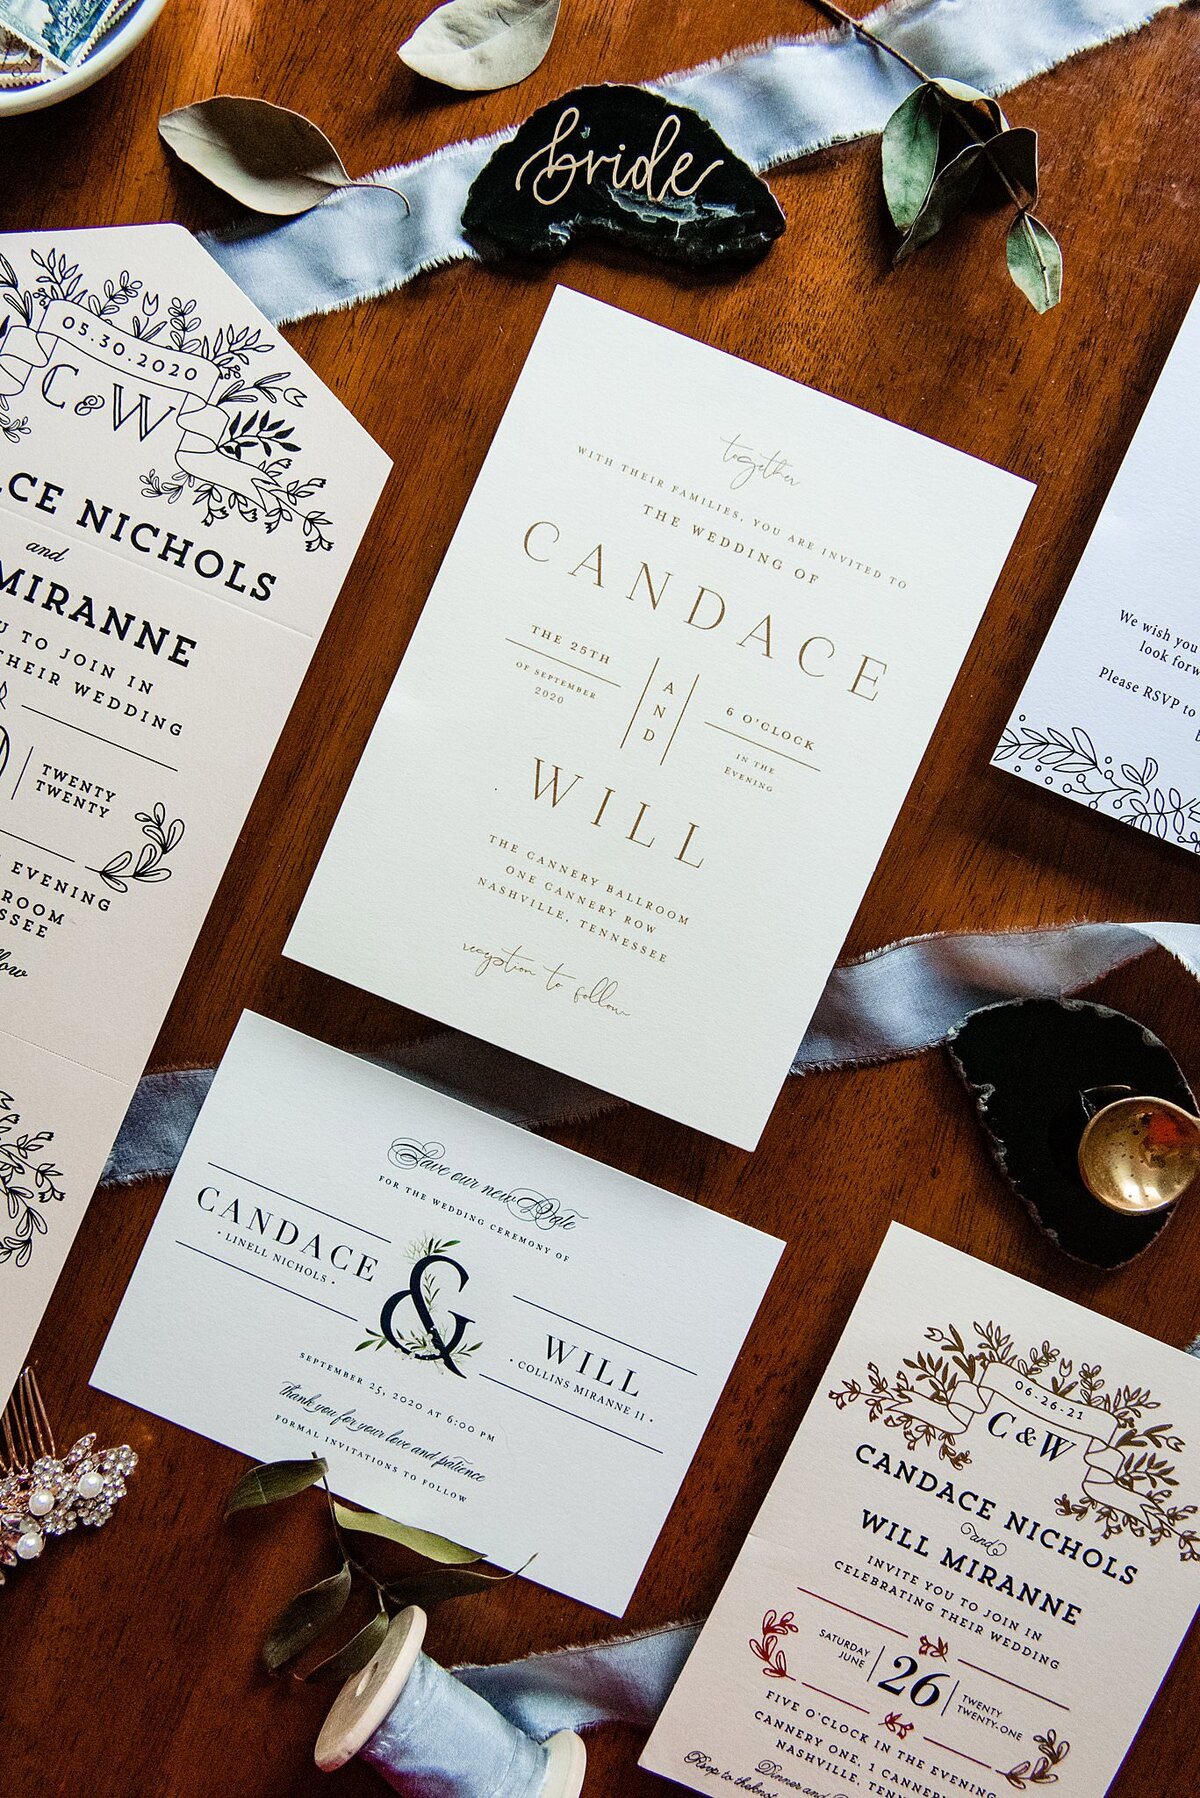 Detail photo of wedding invitations and stationary